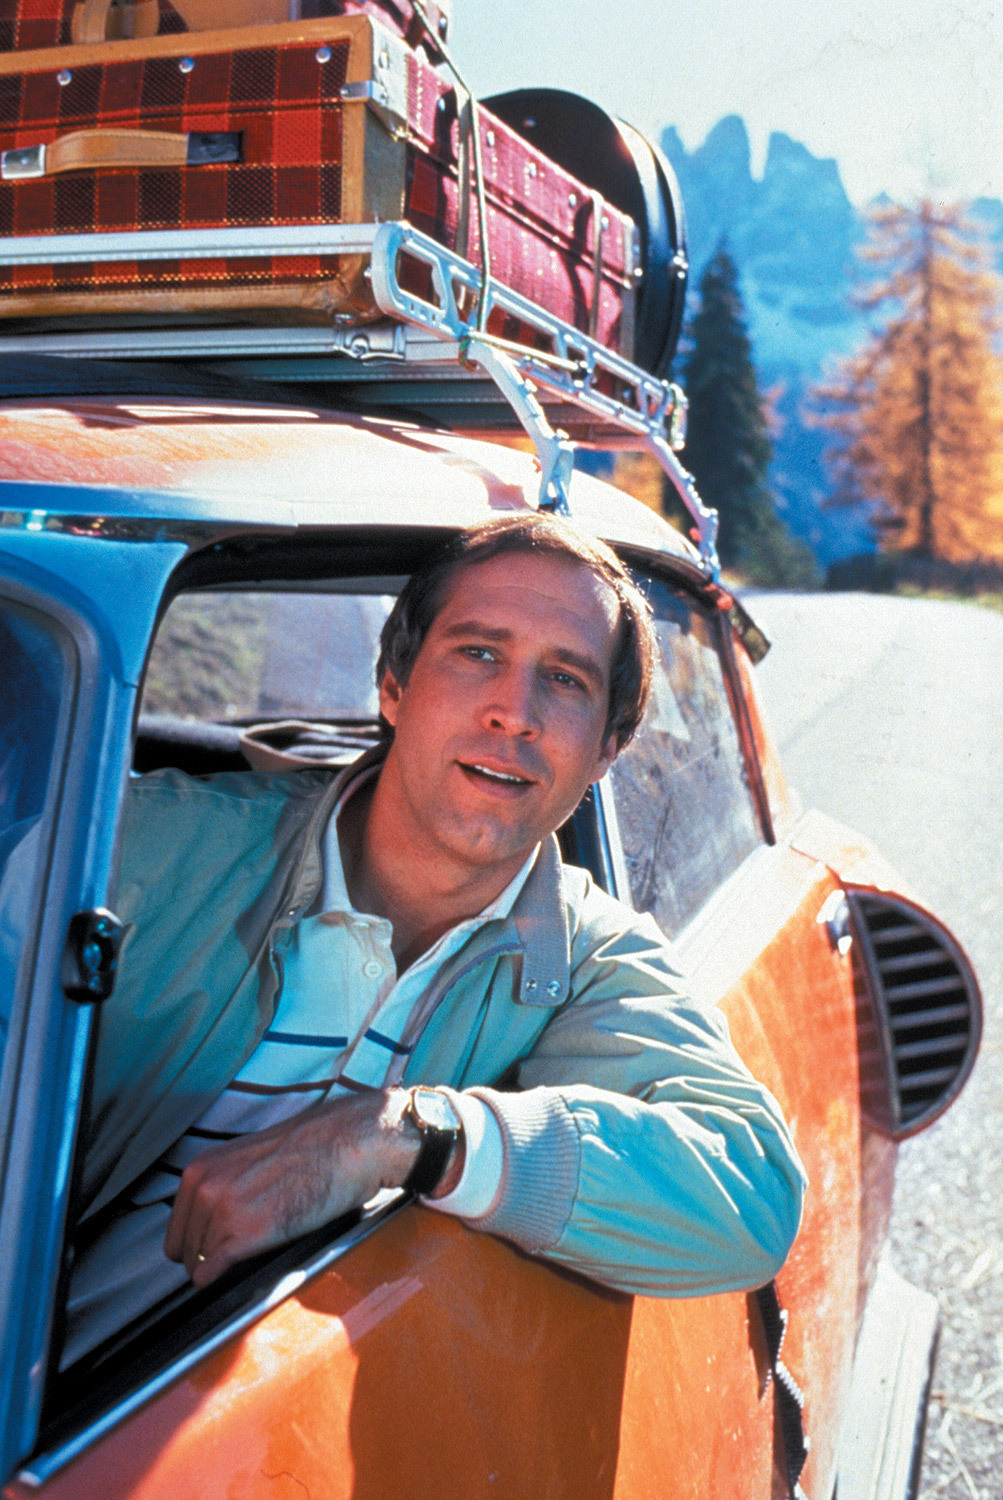 Chevy Chase in National Lampoon's Vacation